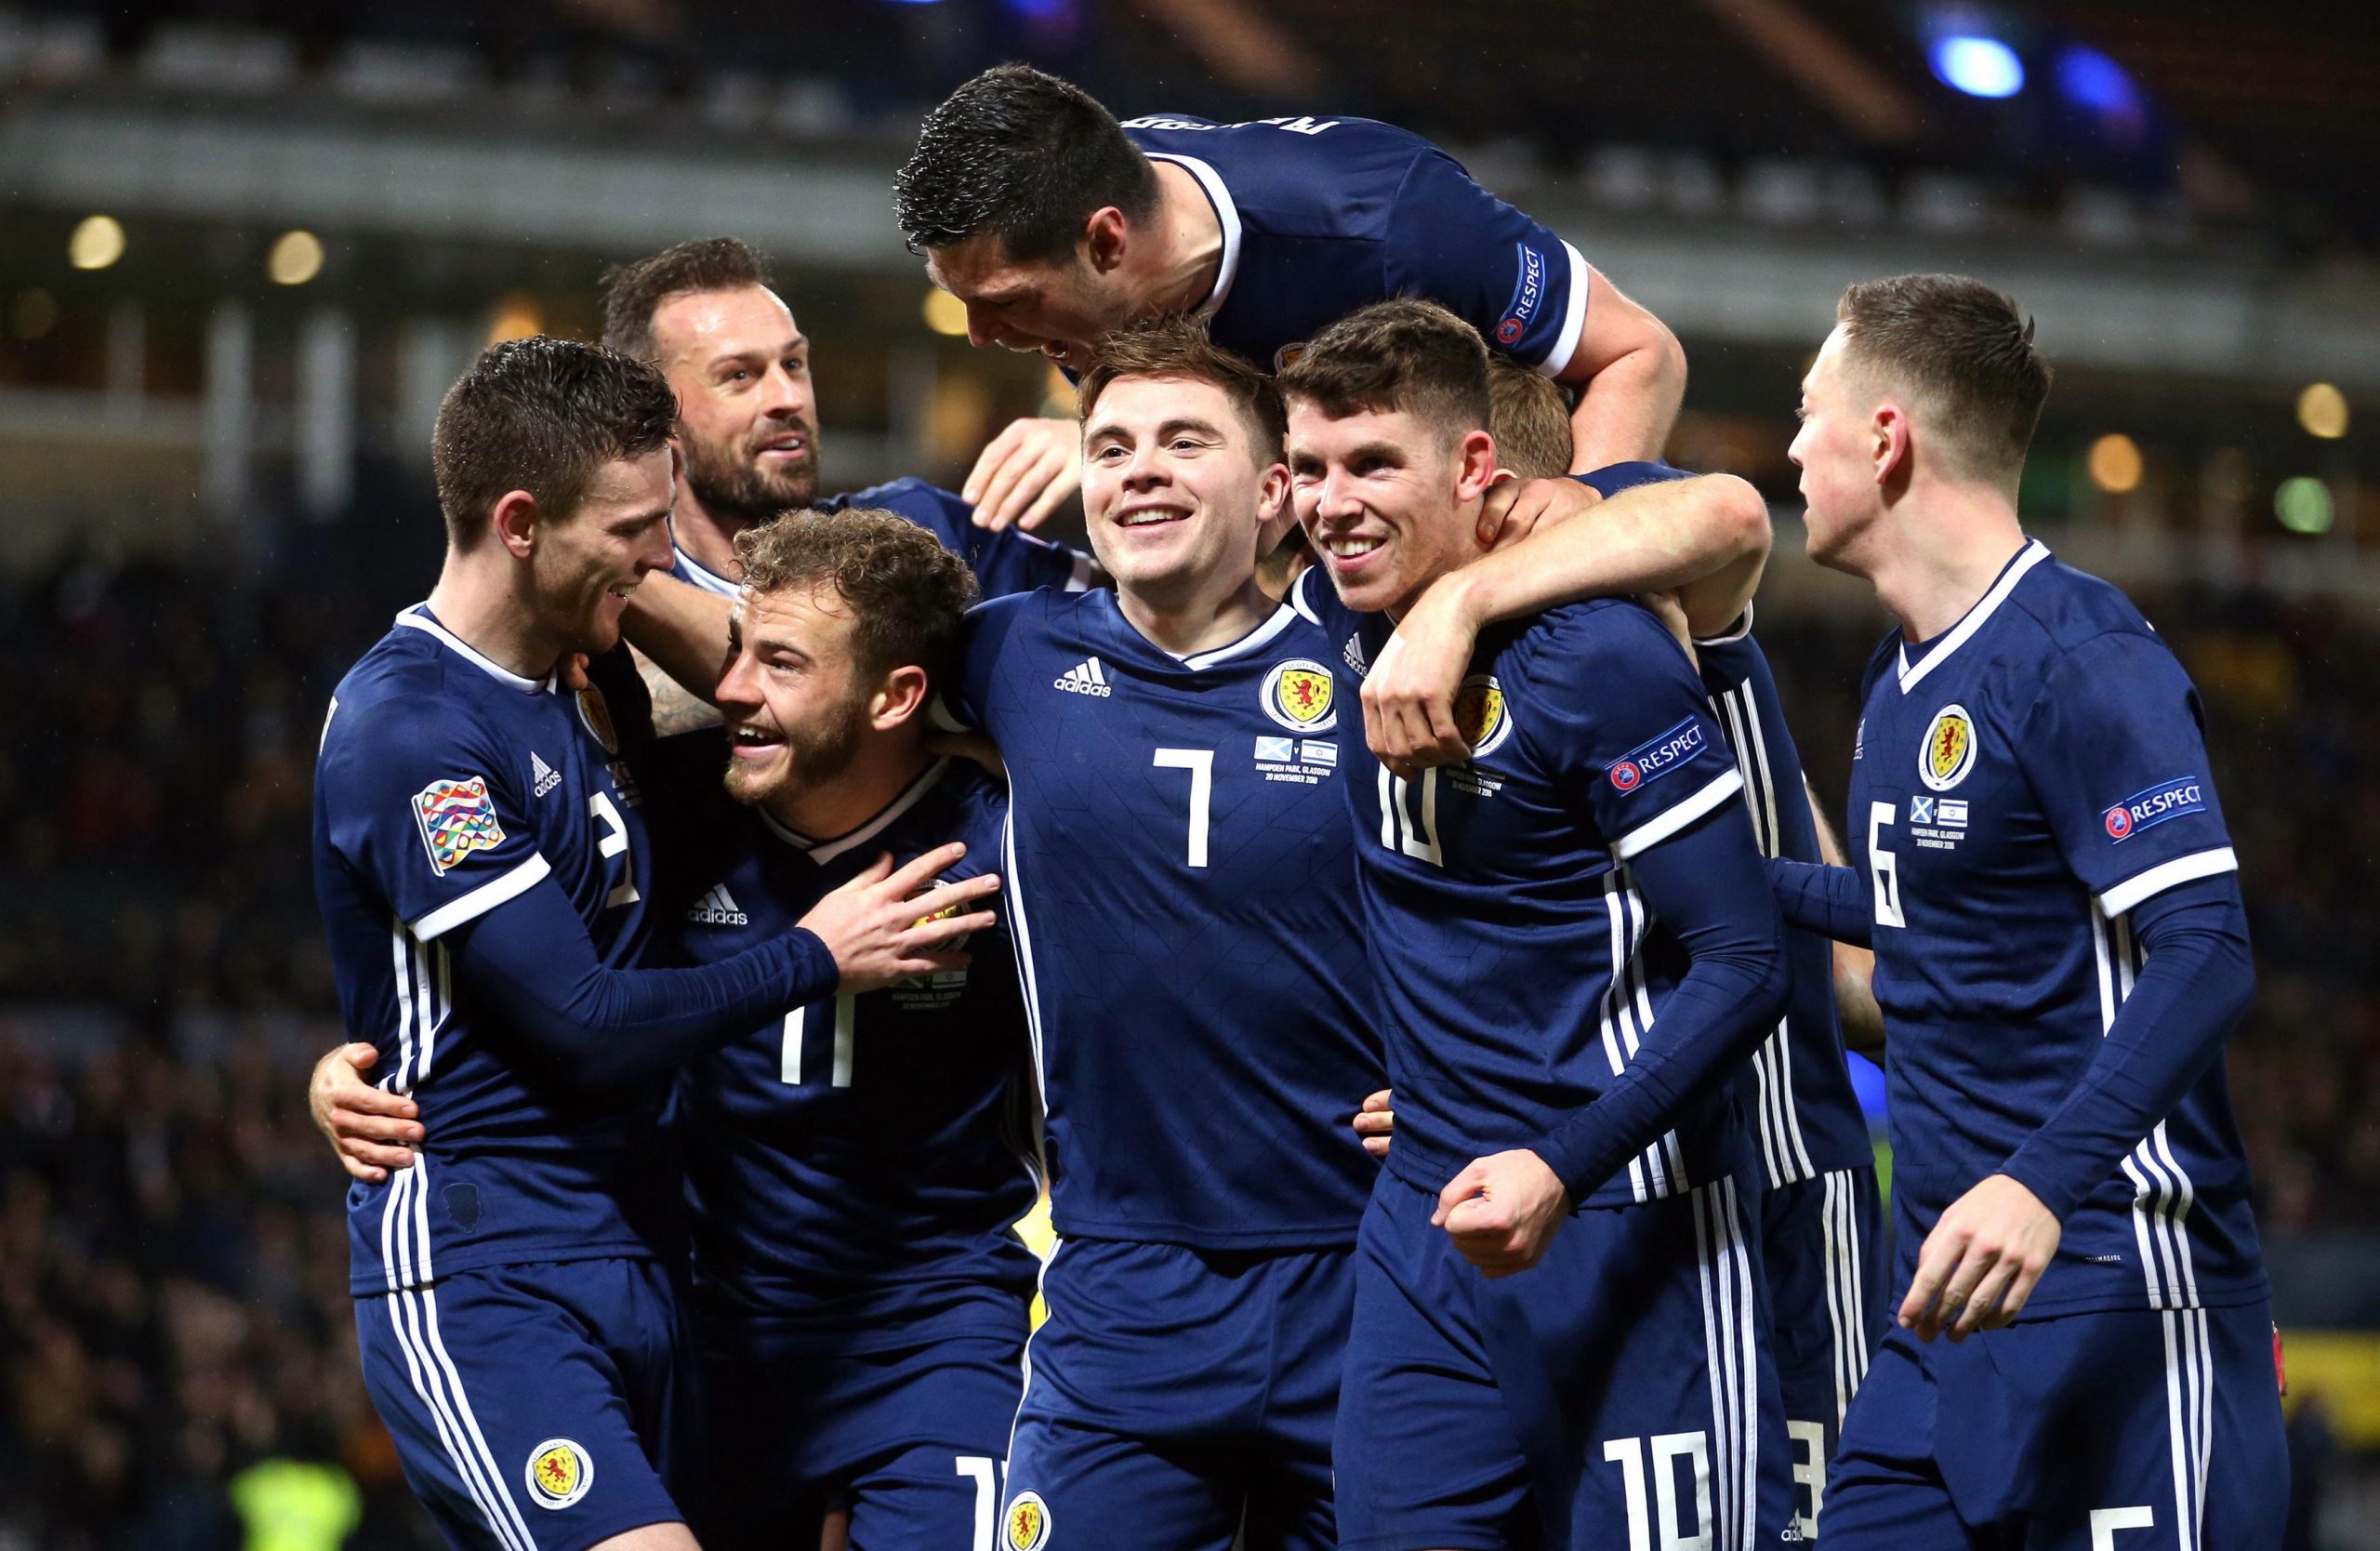 Euro 2020 Qualifying Guide: How are Home Nations Looking and Which of the Big Teams Might Struggle to Make It?